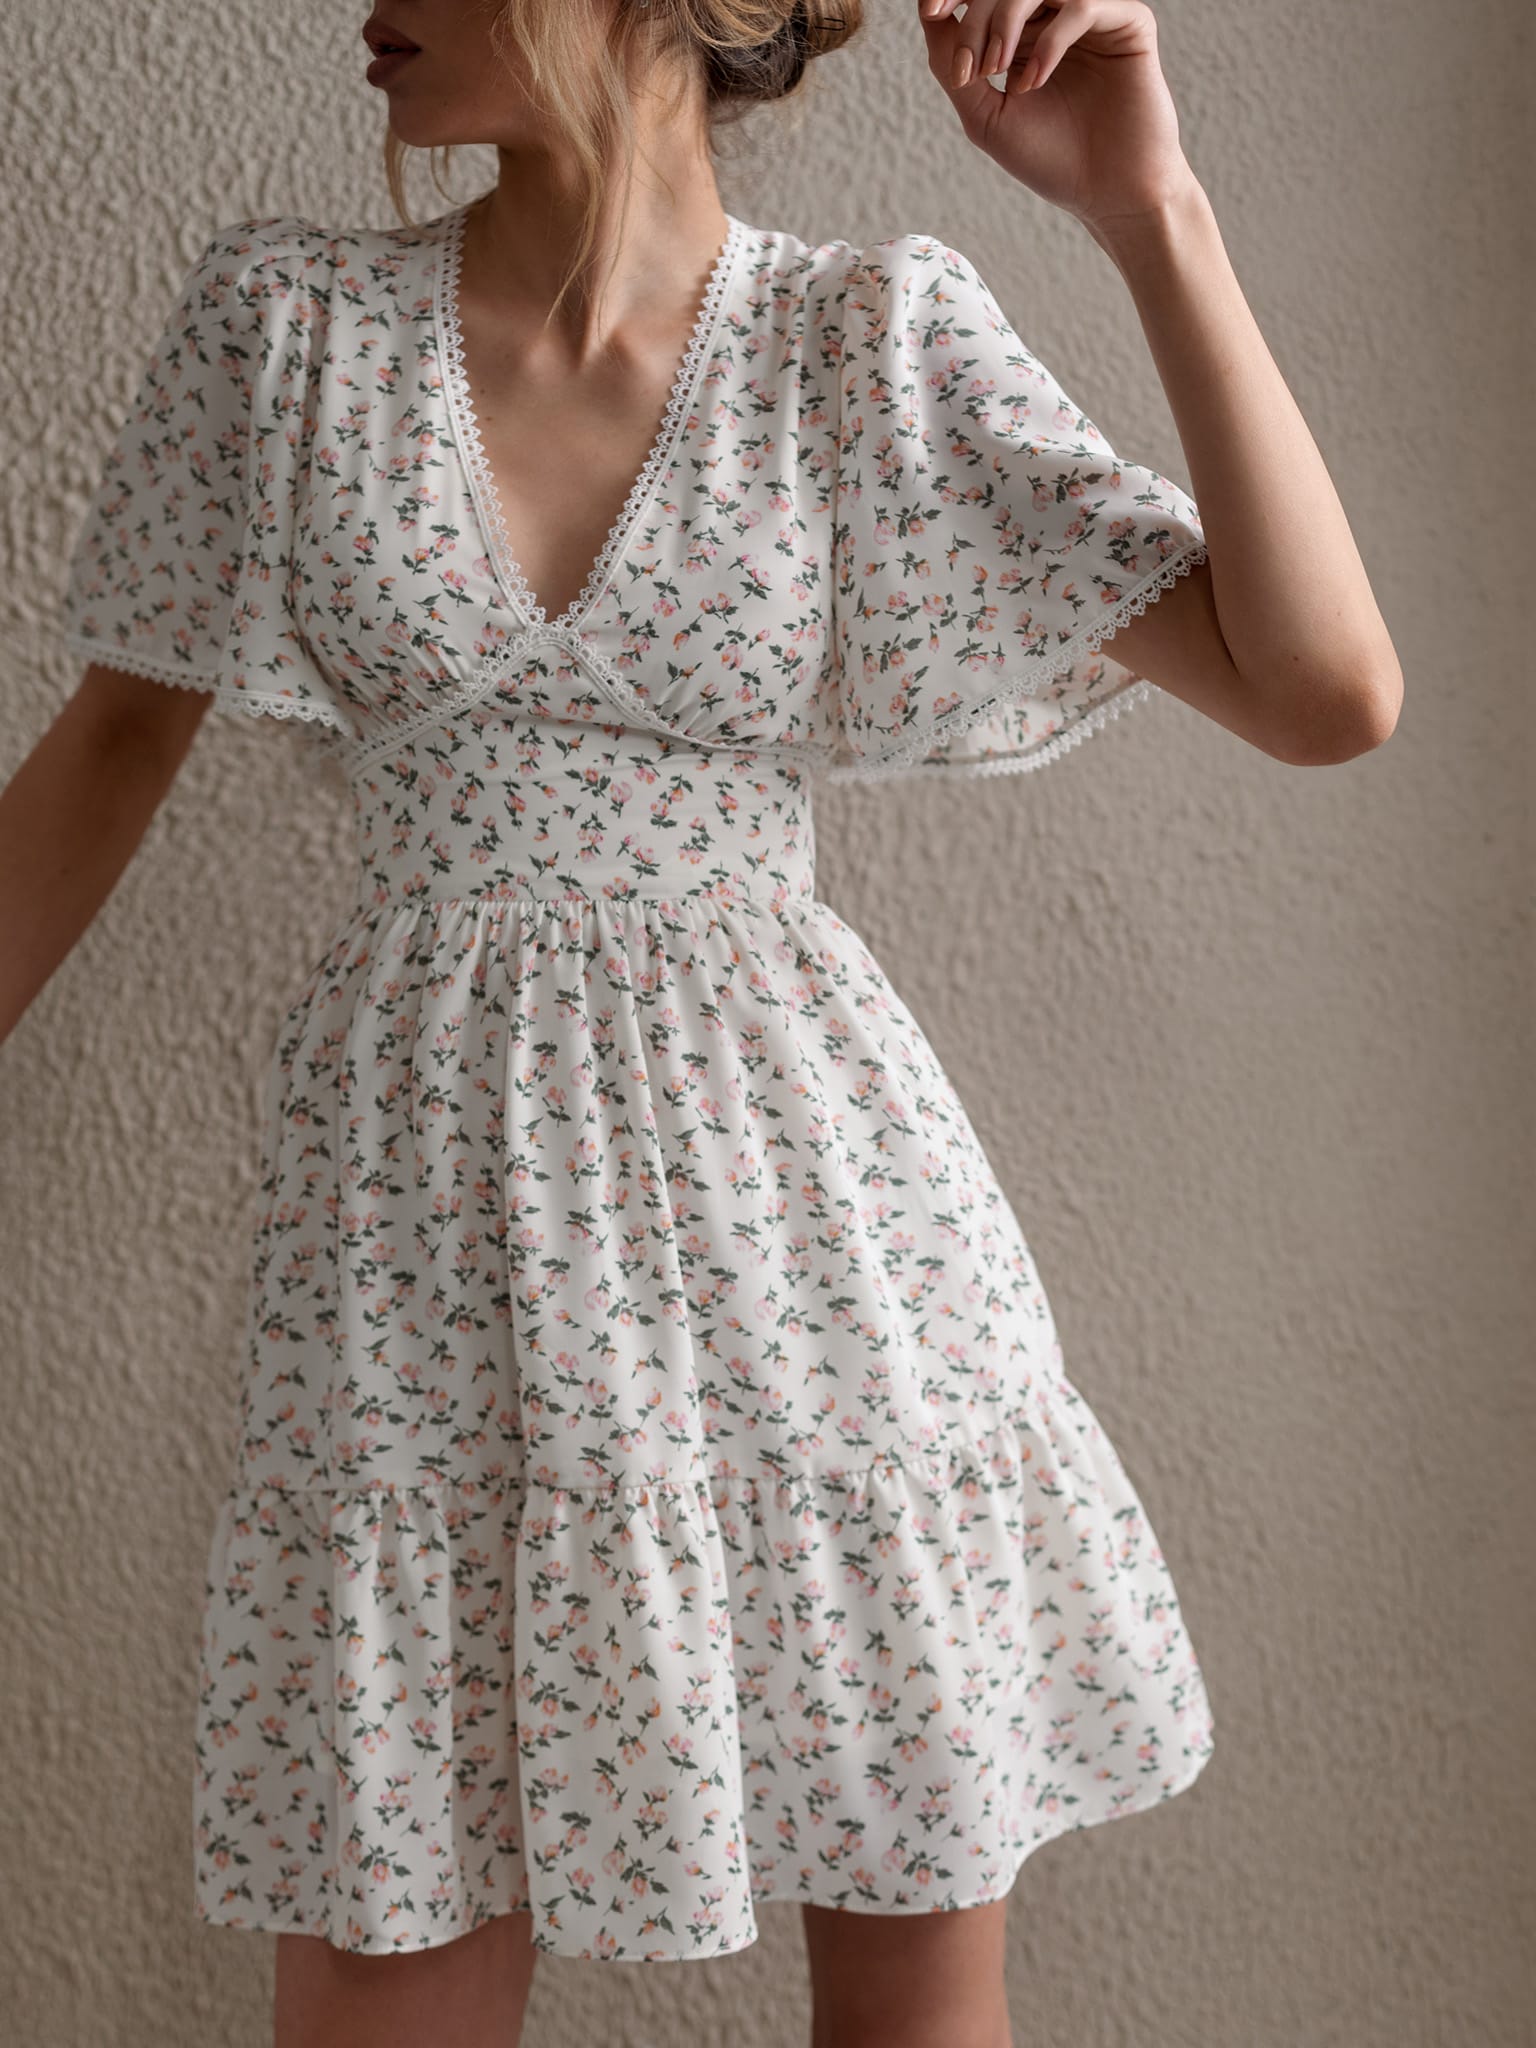 Mini dress trimmed with broderie anglaise